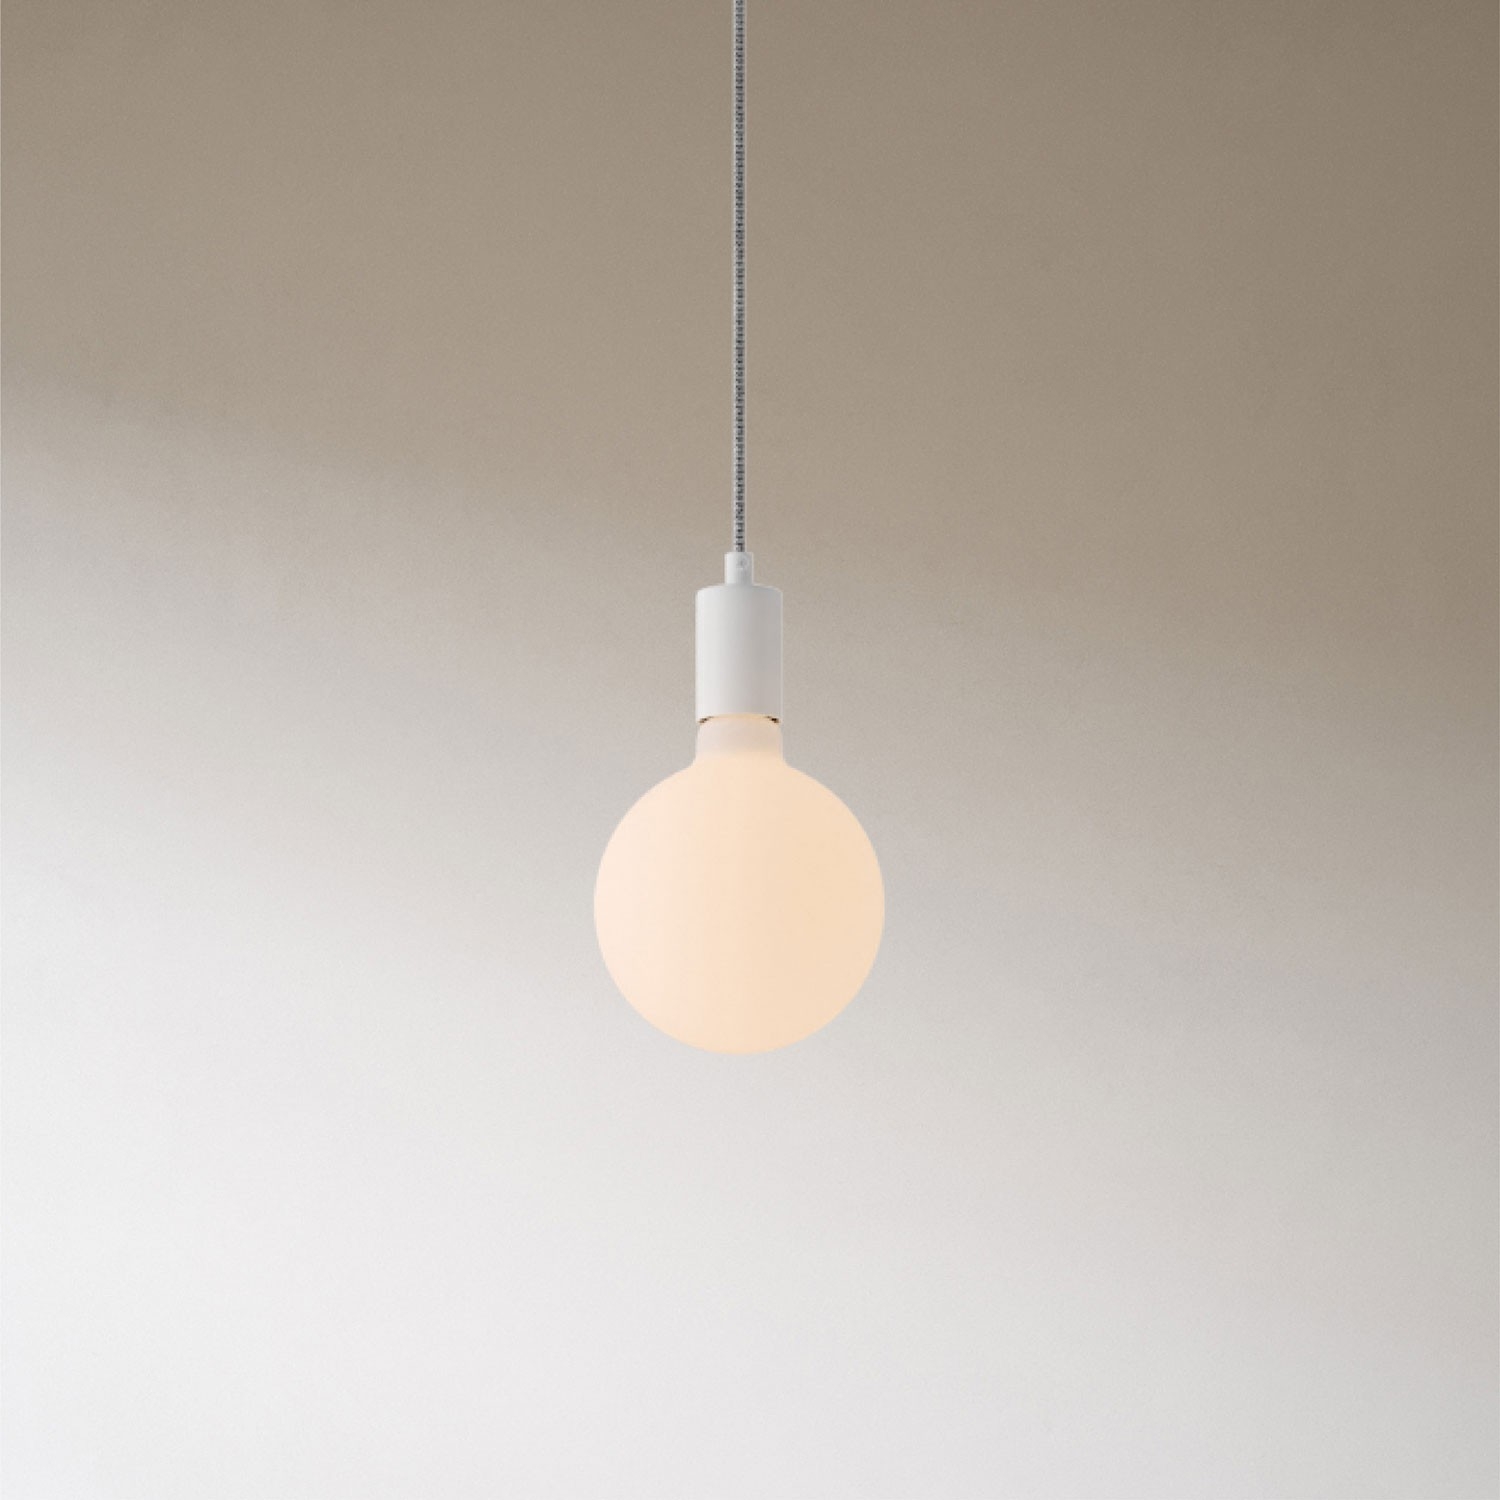 Spider - 3-light multi-pendant Made in Italy lamp featuring fabric cable and metal finishes